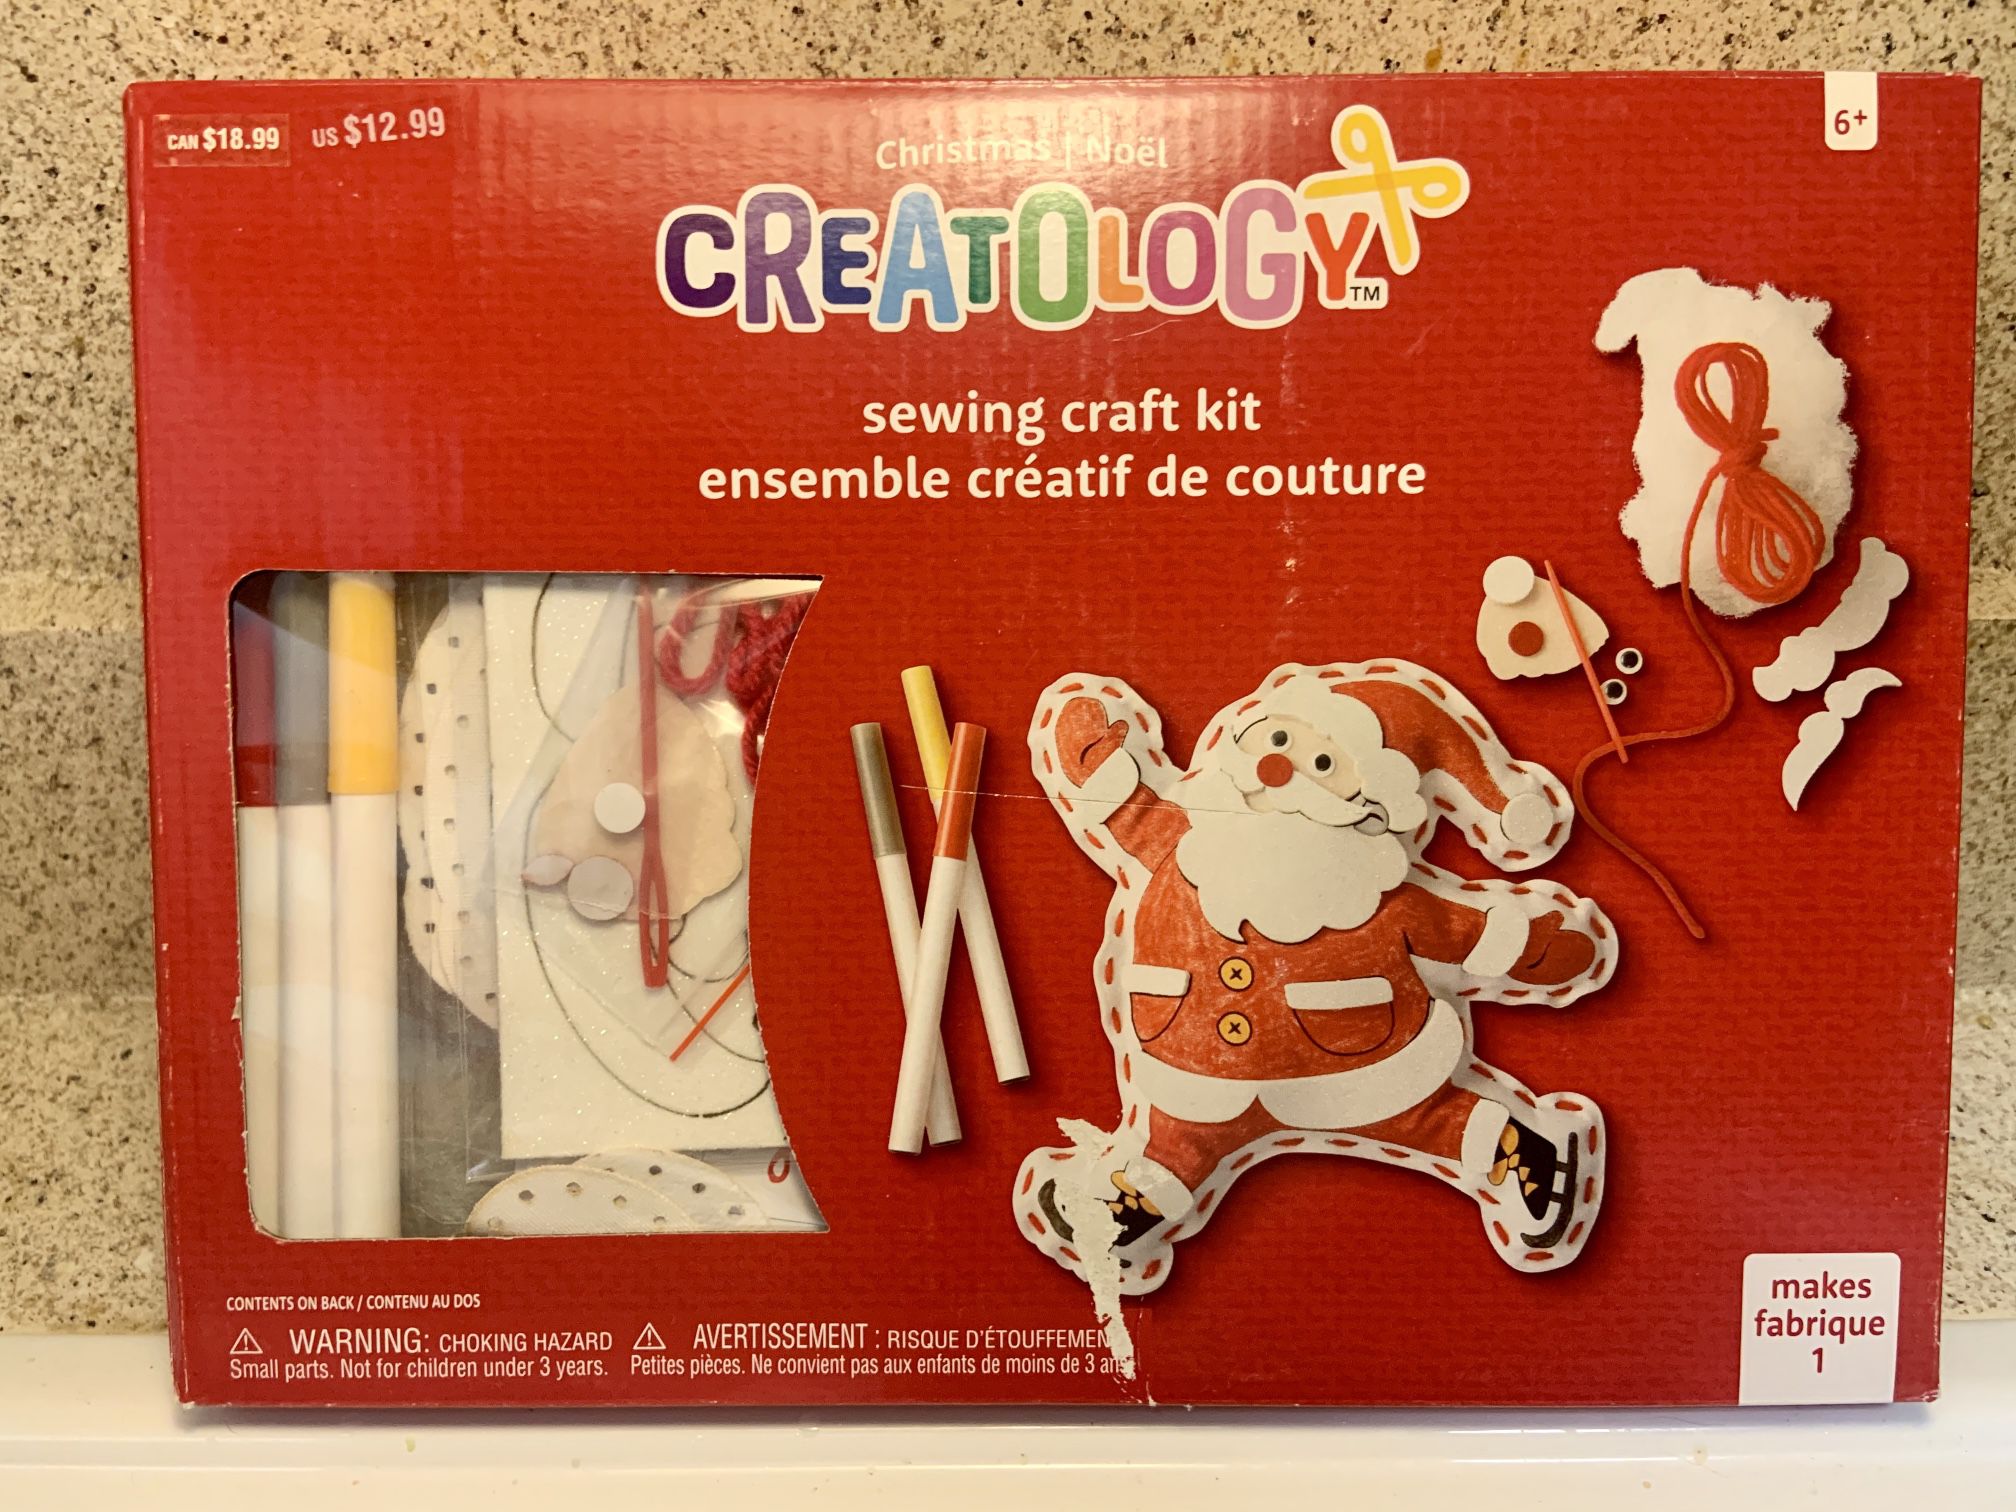 Creatology Art Set - Christmas gift for kids for Sale in San Diego, CA -  OfferUp